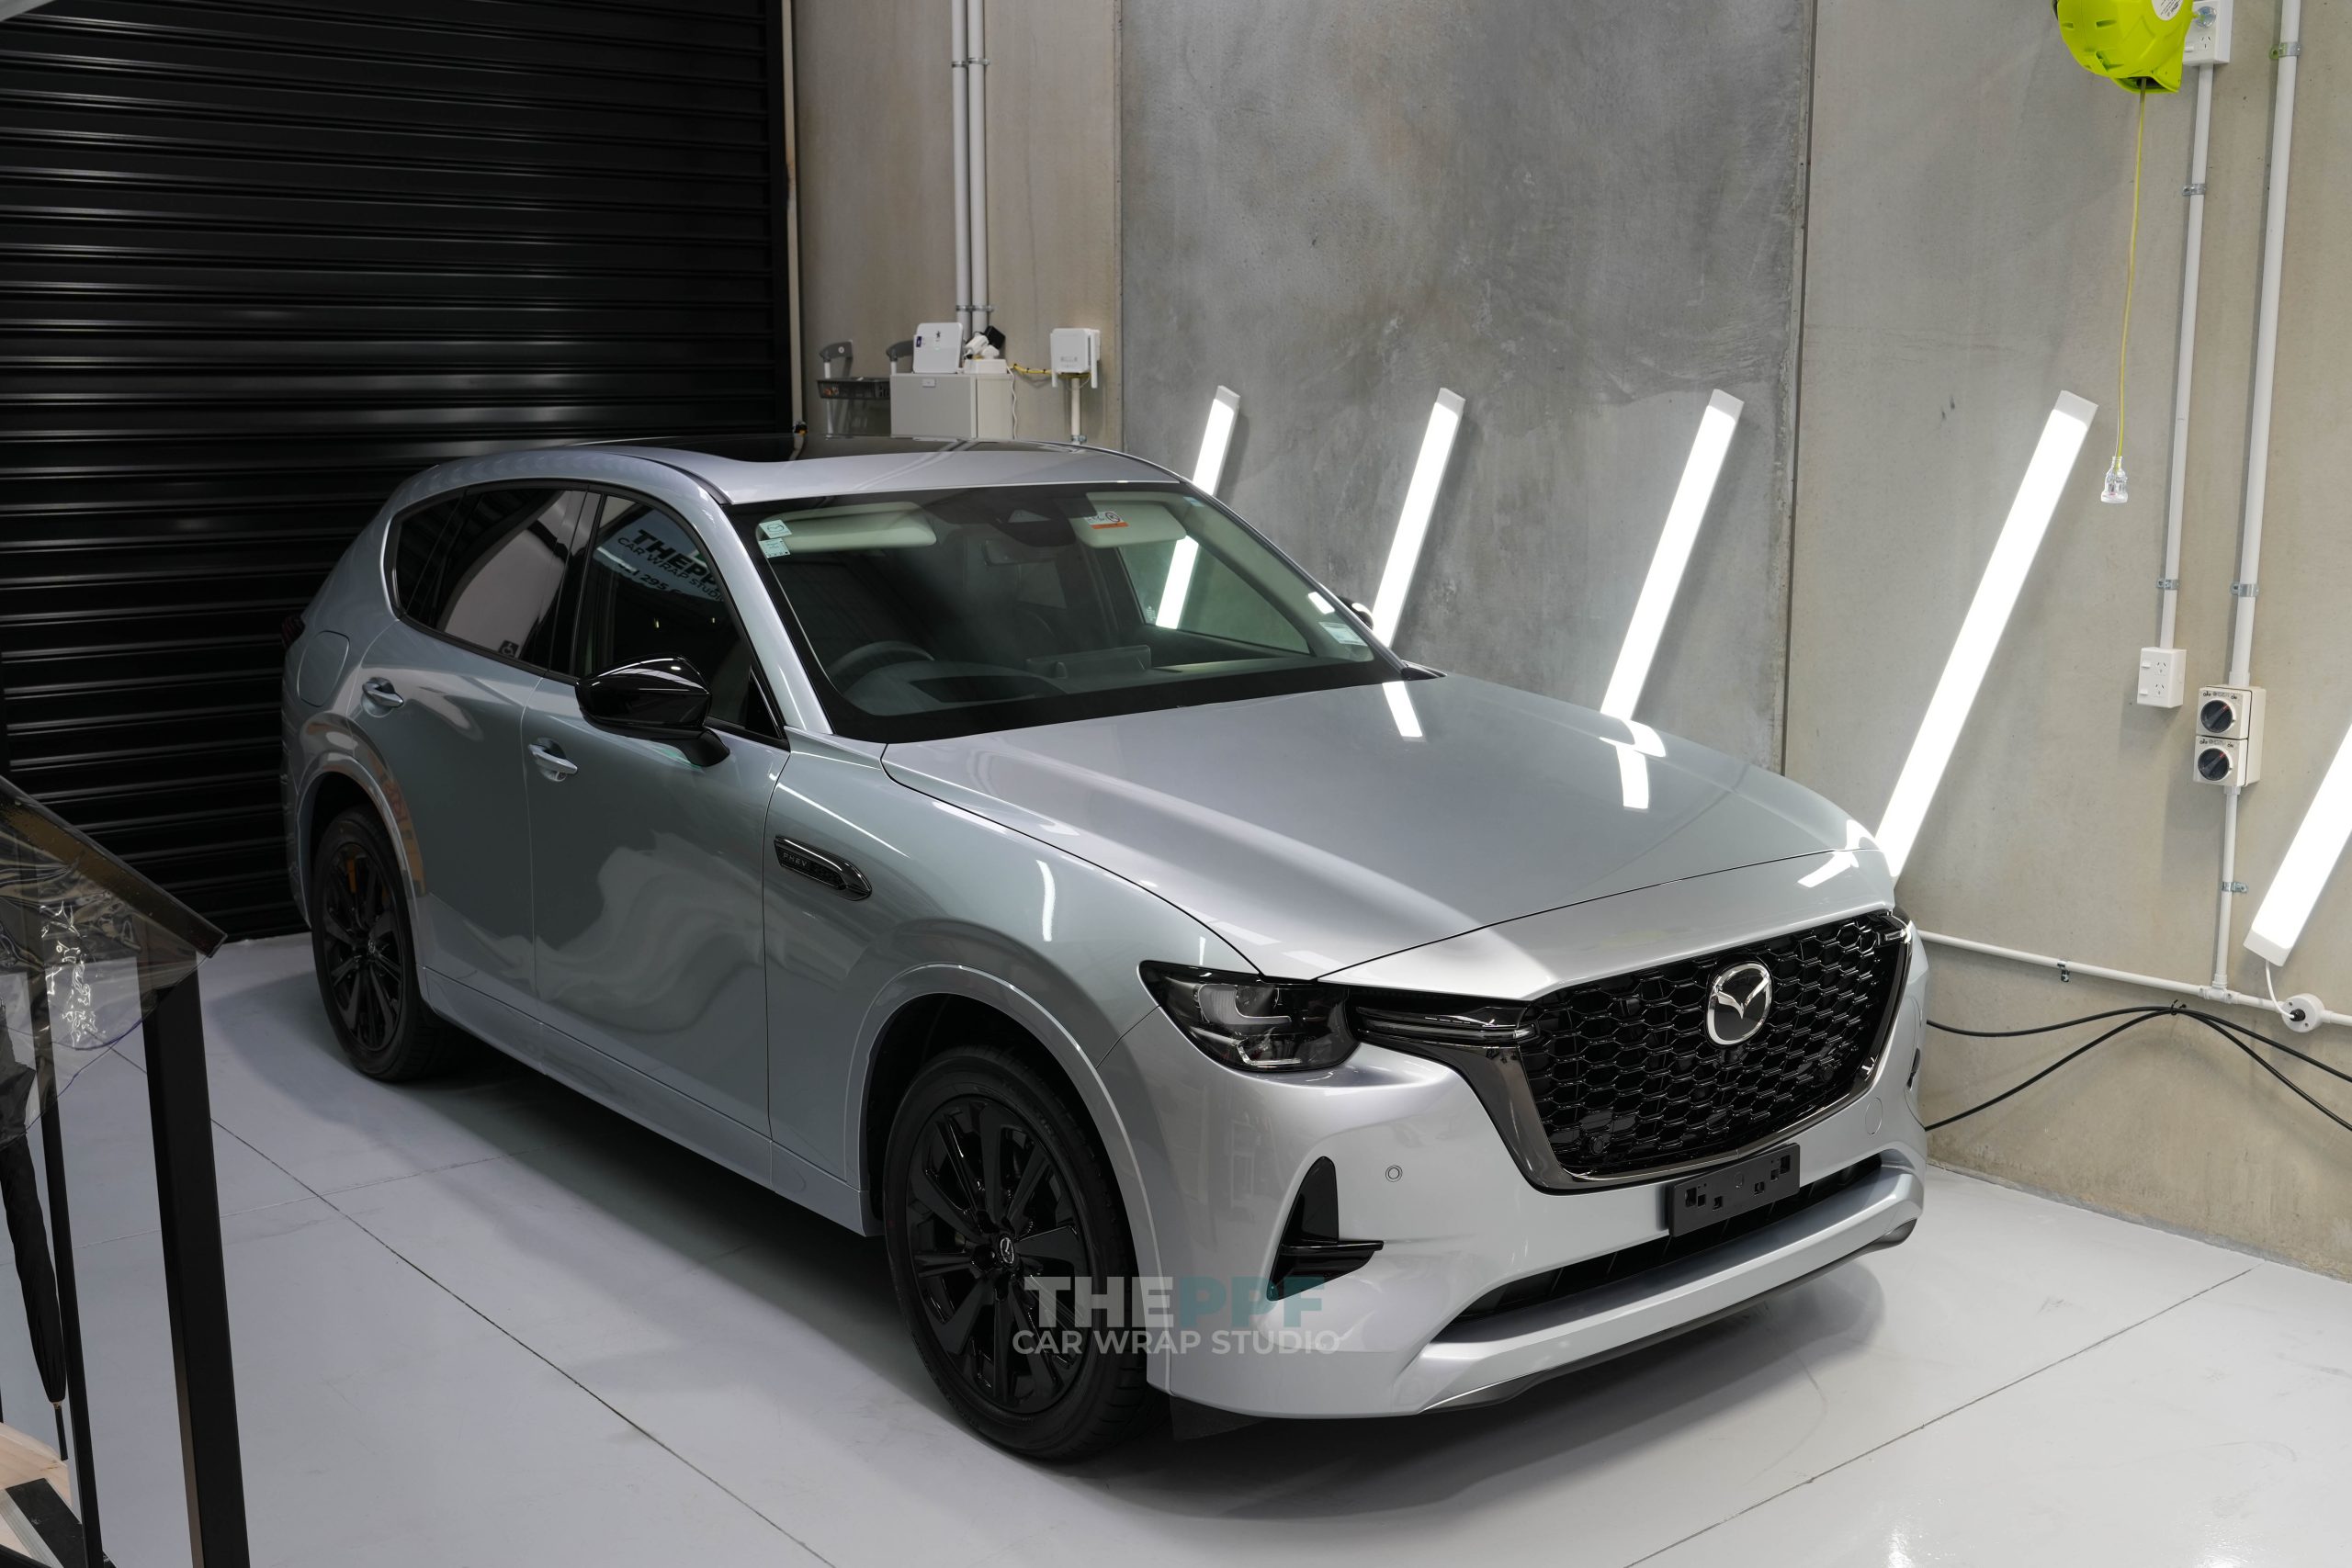 the ppf mazda car paint protection film wrap auckland